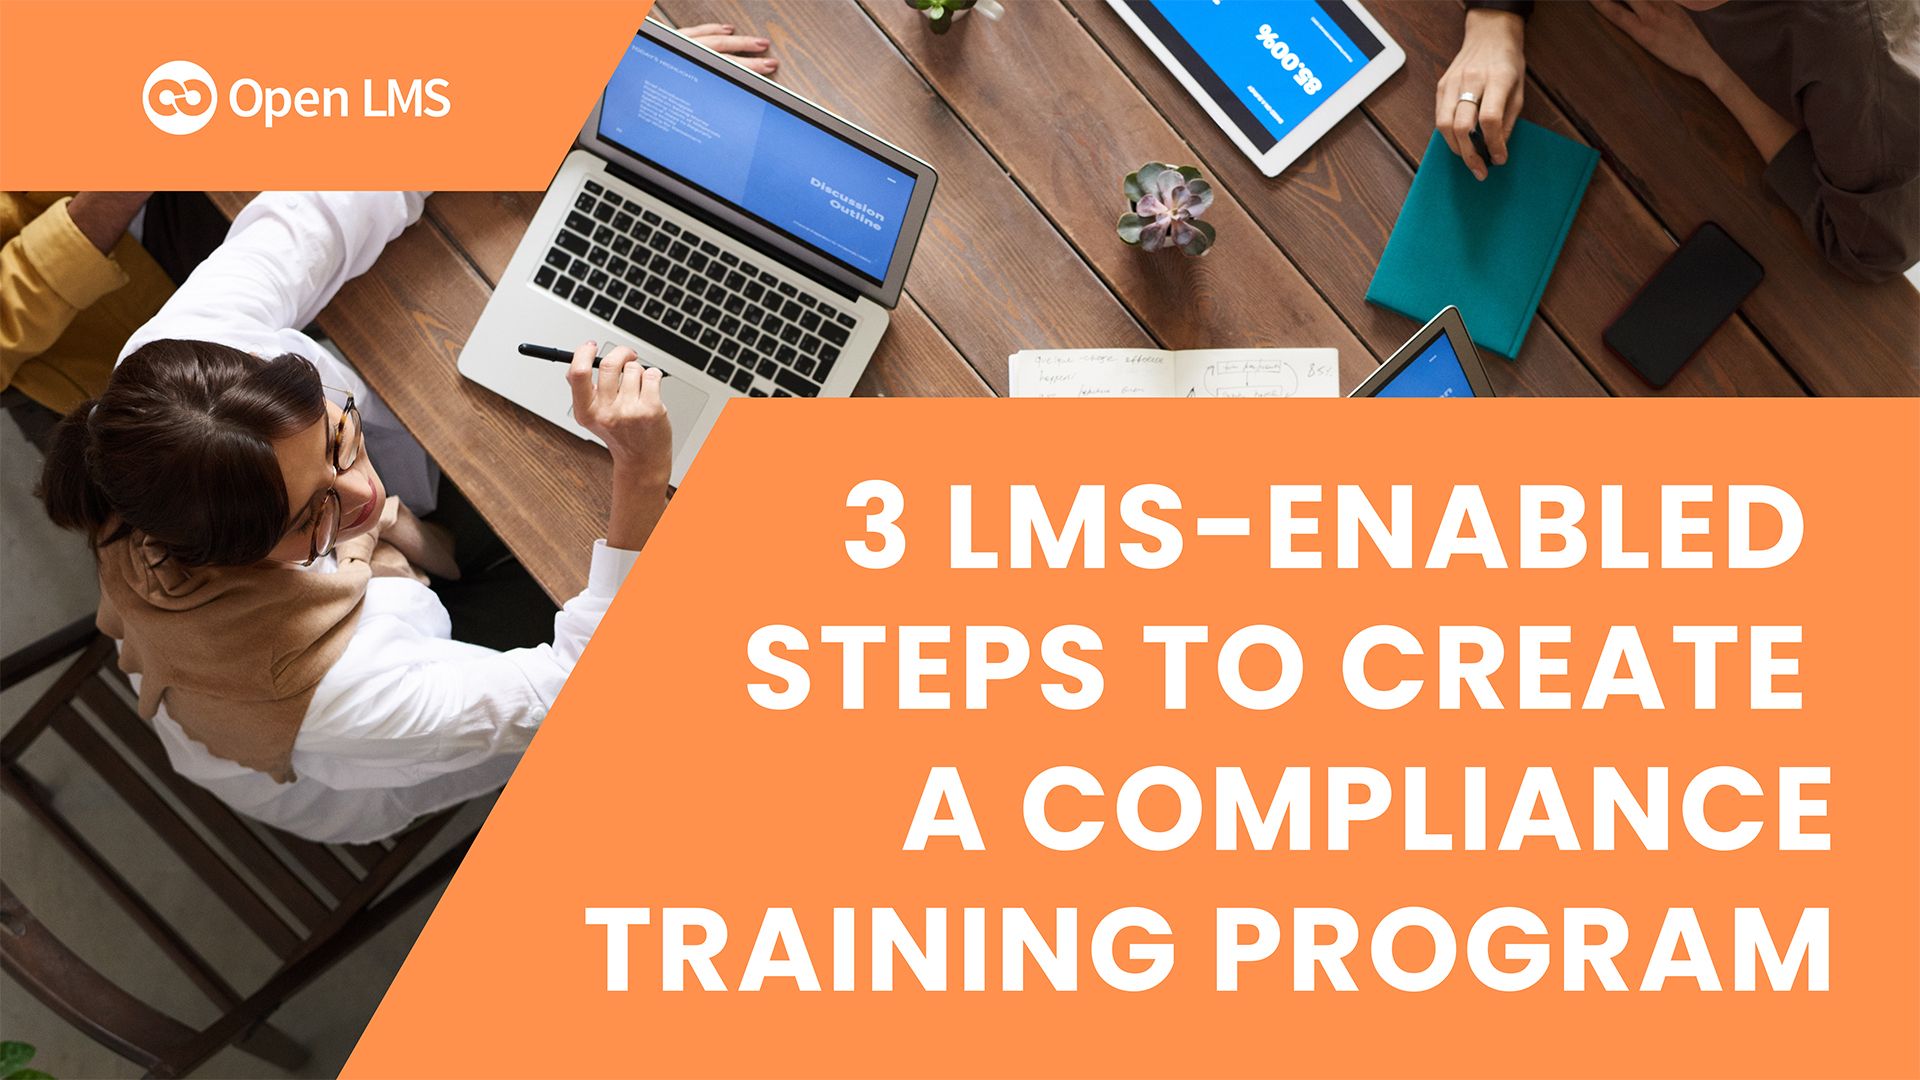 3 LMS-Enabled Steps to Take When Creating a Strong Compliance Training Program